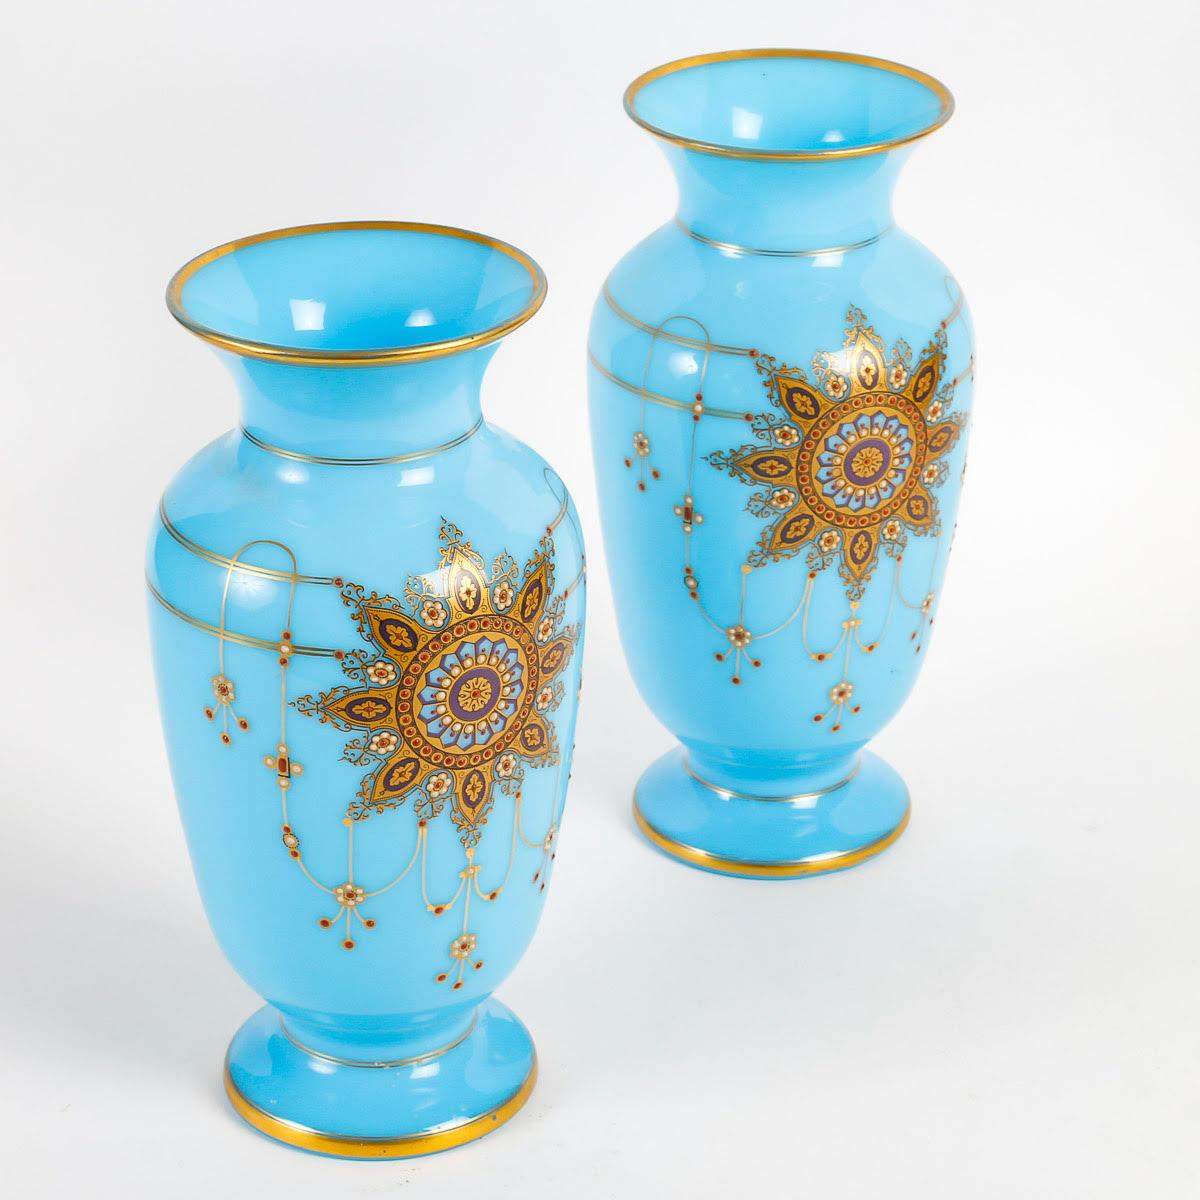 Pair of Opaline Vases, 19th Century, Napoleon III Style.

A pair of gold enamelled turquoise opaline vases, 19th century, Napoleon III period.
h: 30,5cm, d: 15cm